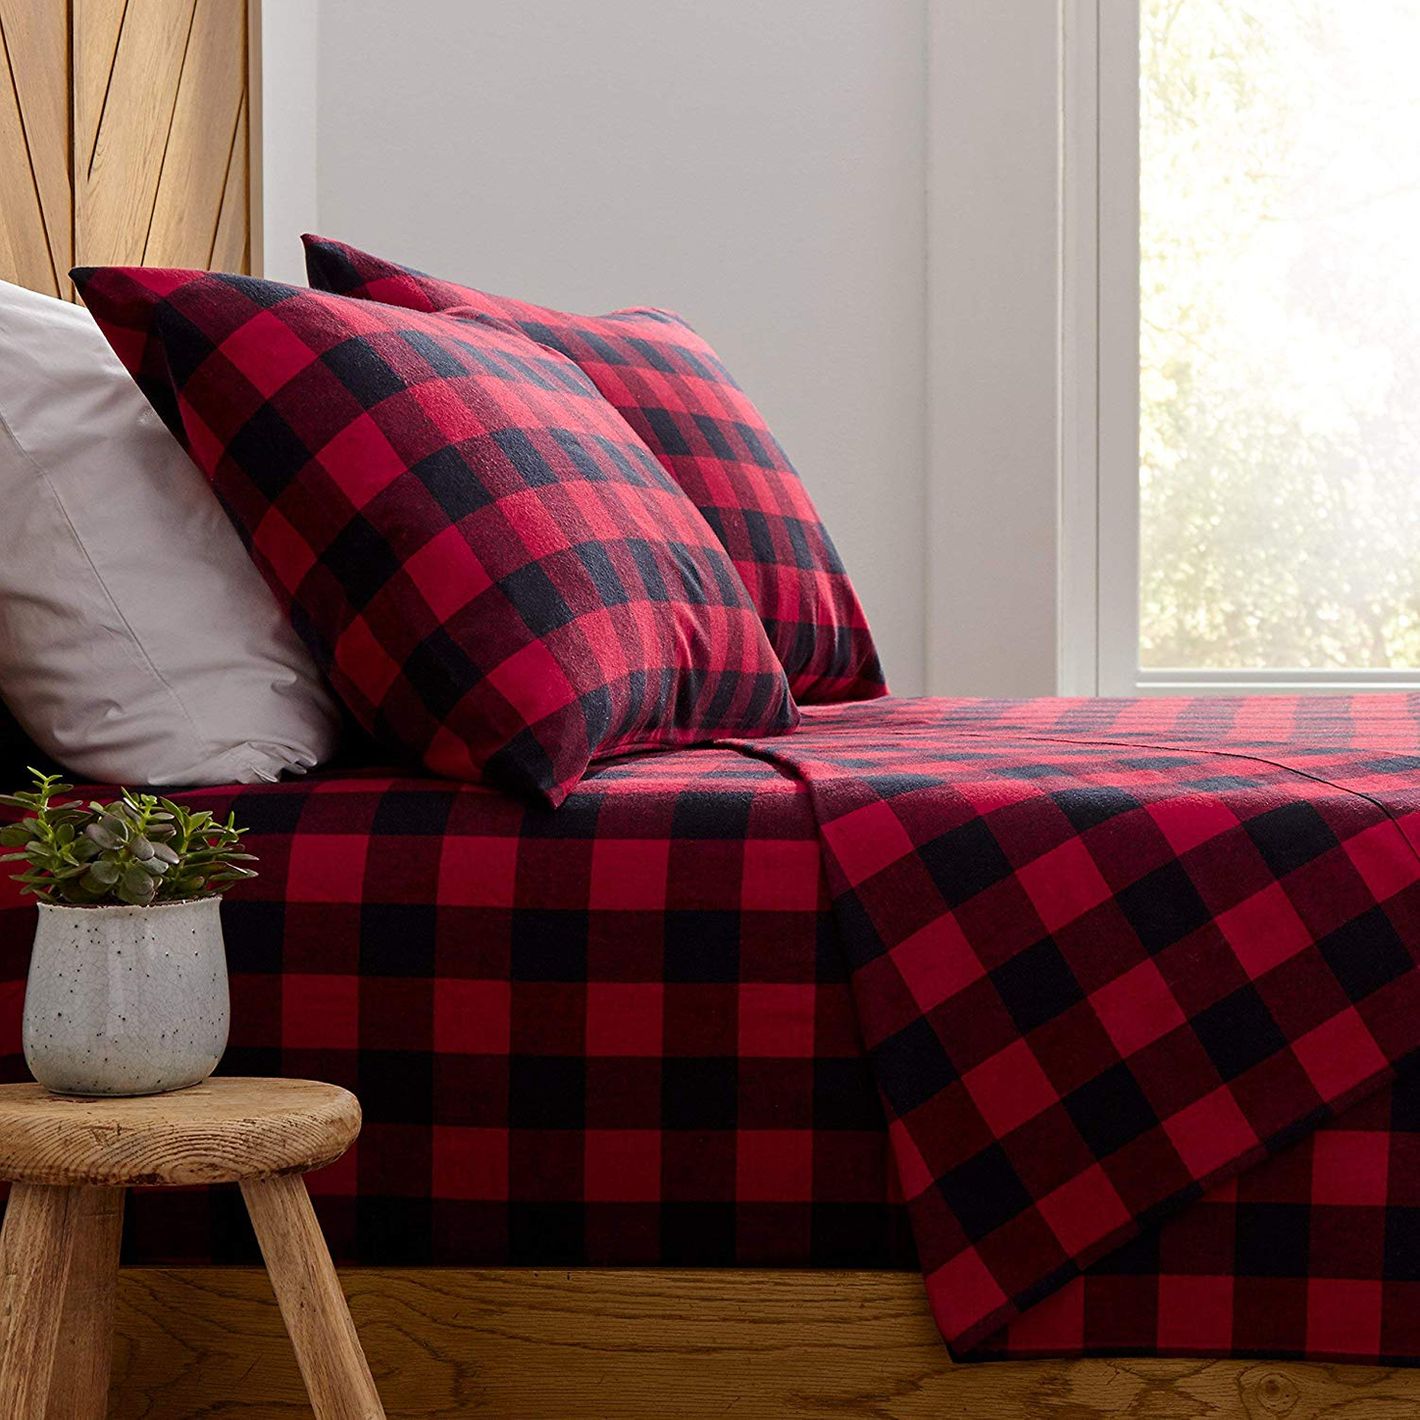 13 Best Flannel Sheet Sets 2019 The, King Flannel Bed Sheets